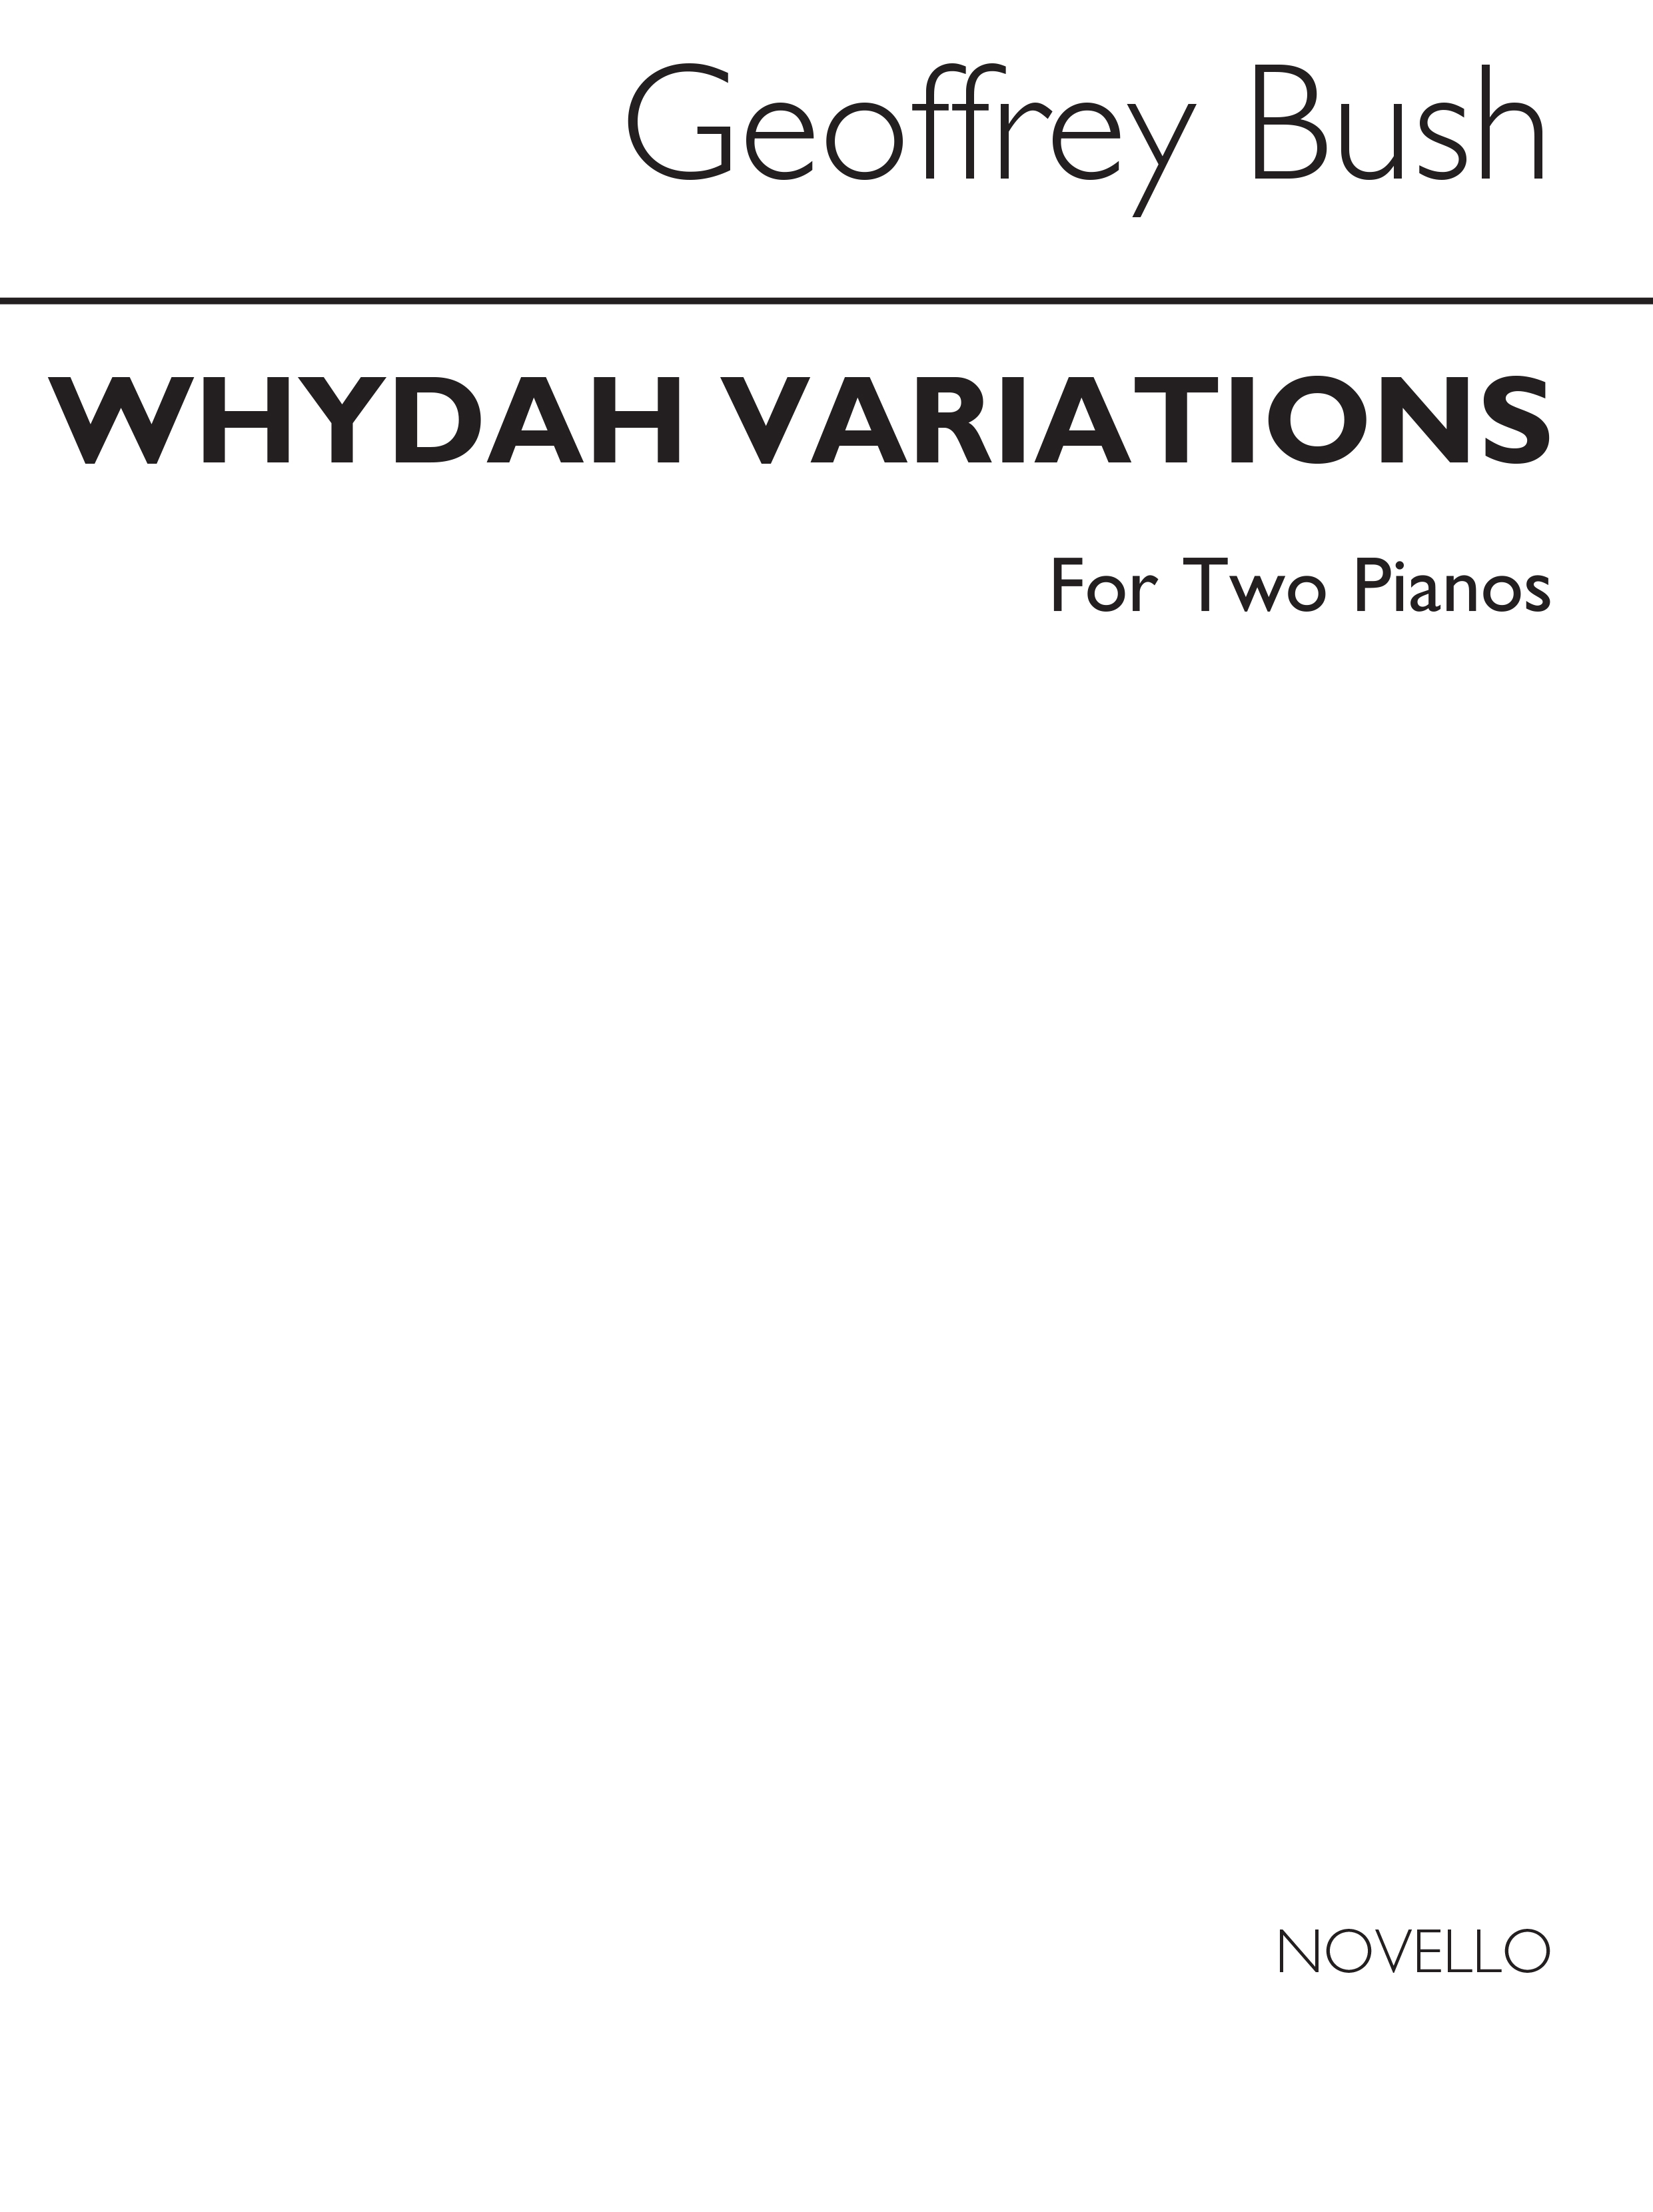 Geoffrey Bush: Whydah Variations For Two Pianos